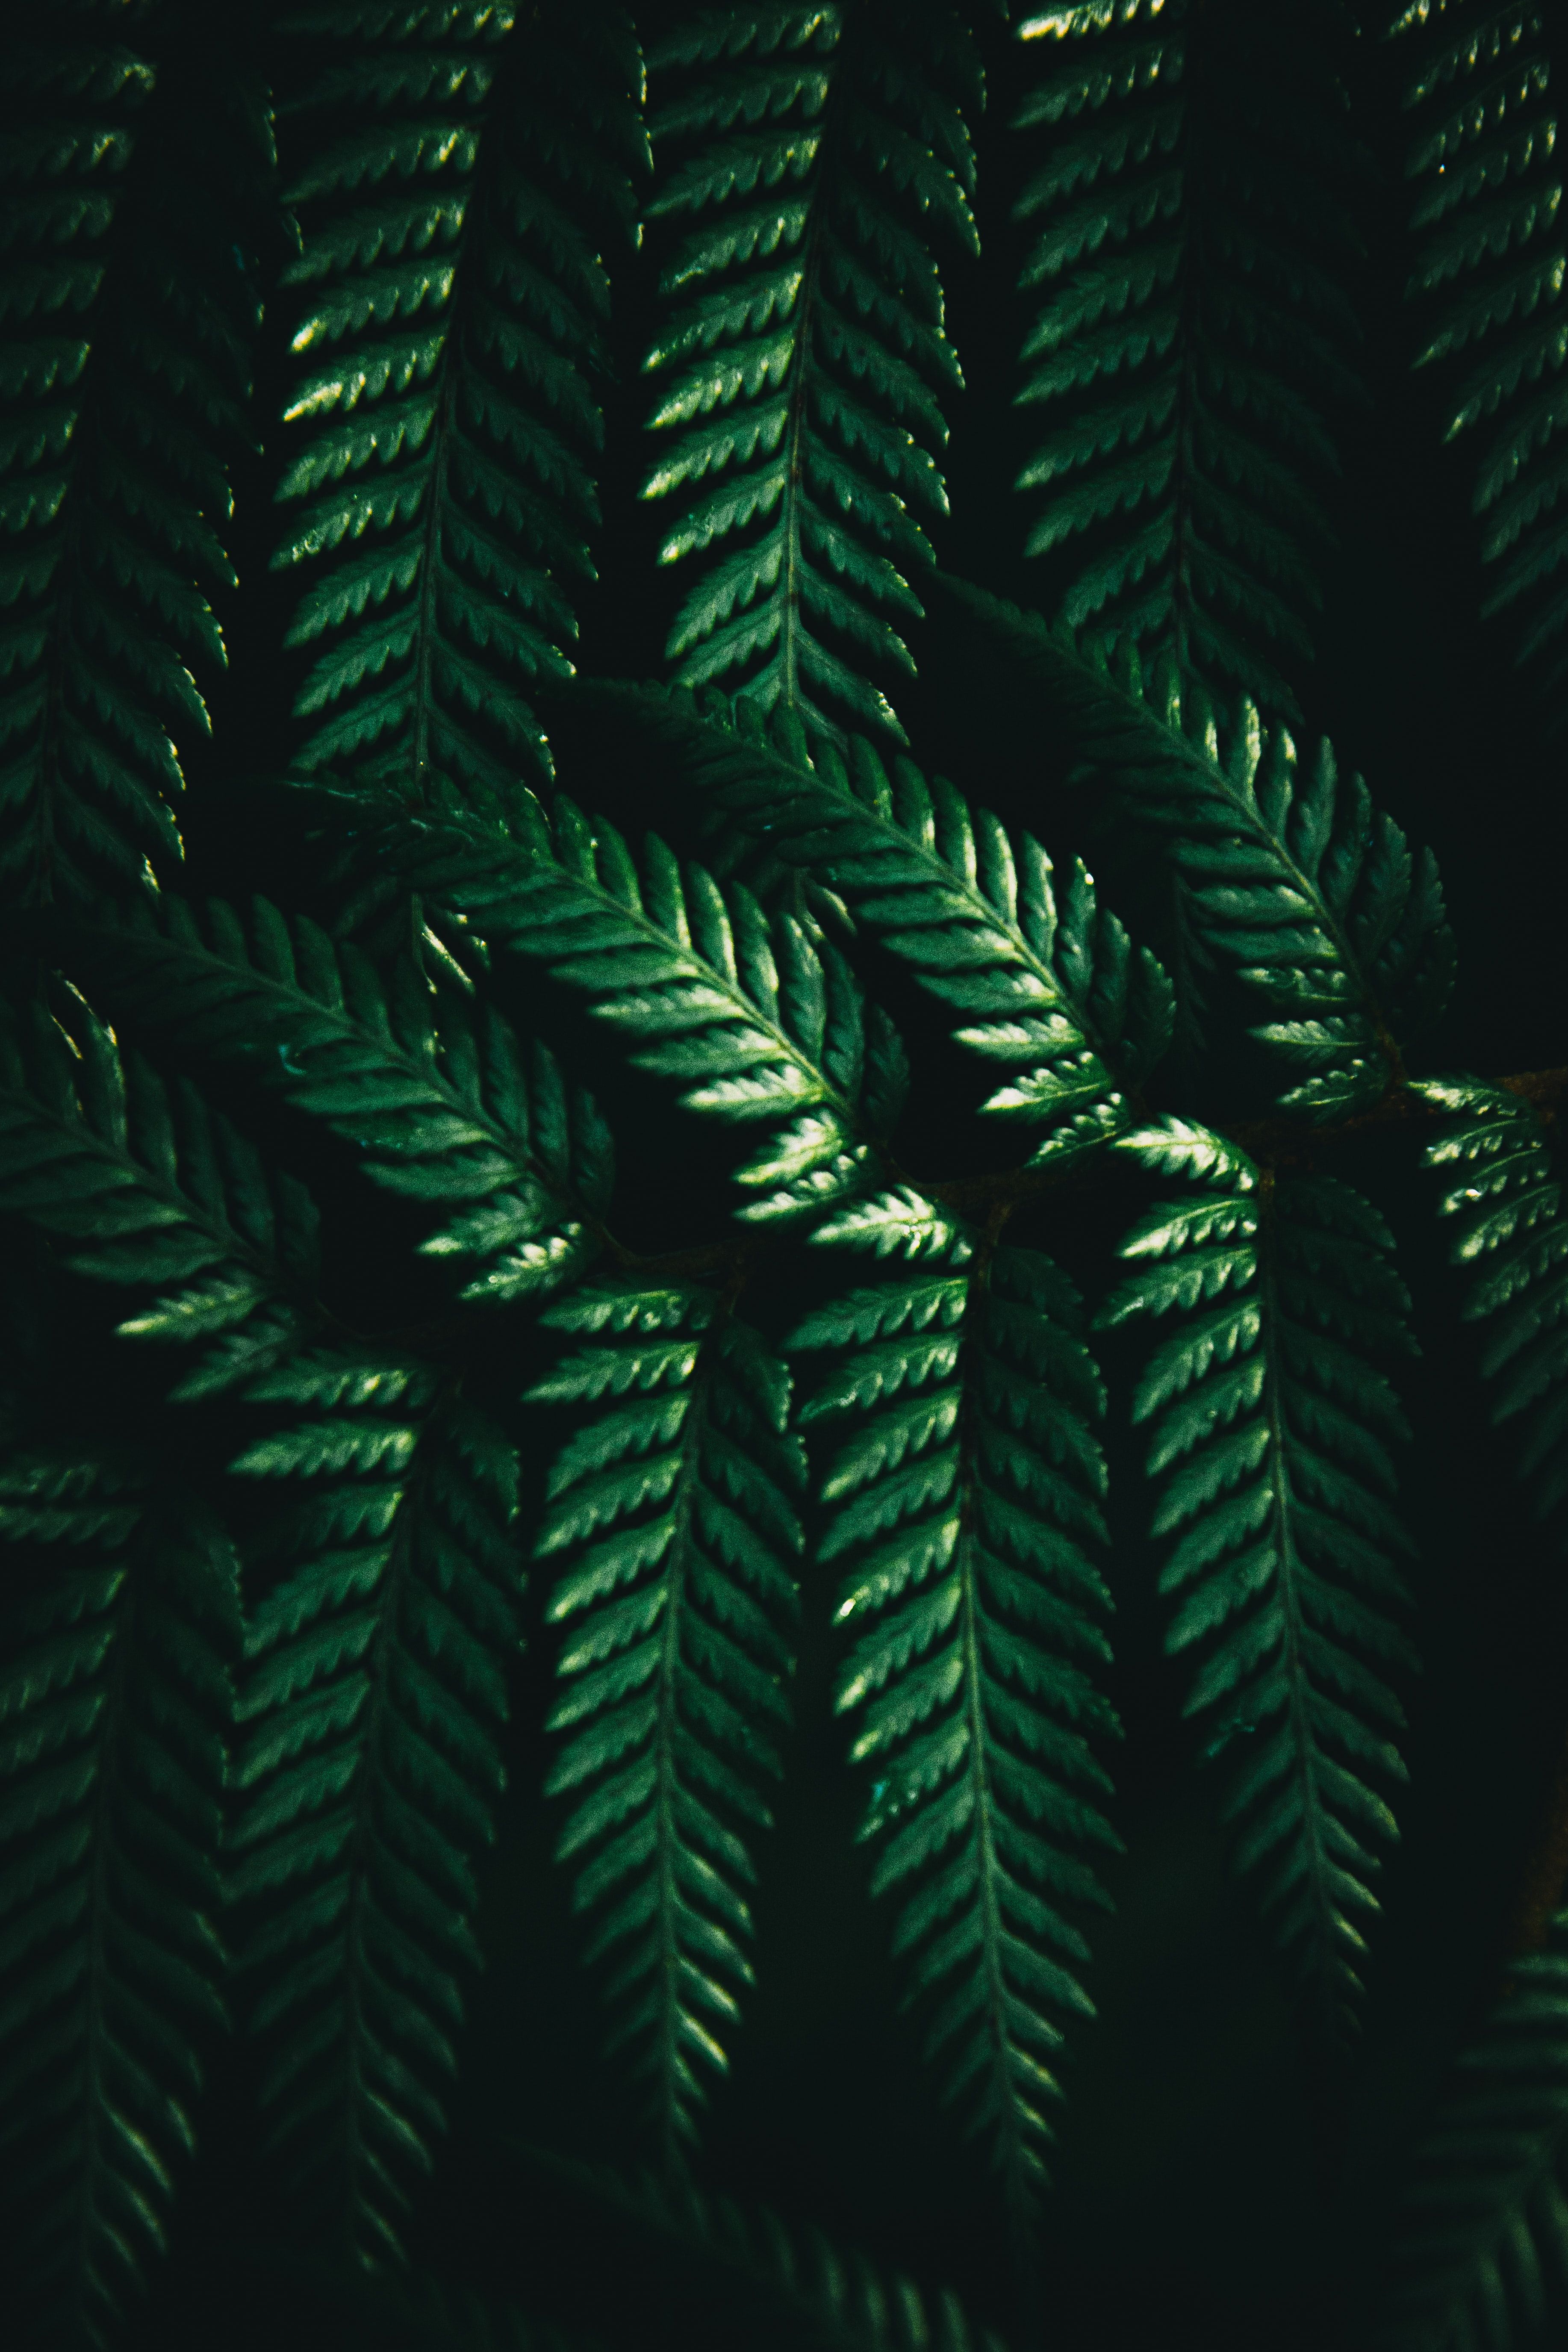 Mobile wallpaper: Macro, Leaves, Fern, Dark, 50593 download the picture for free